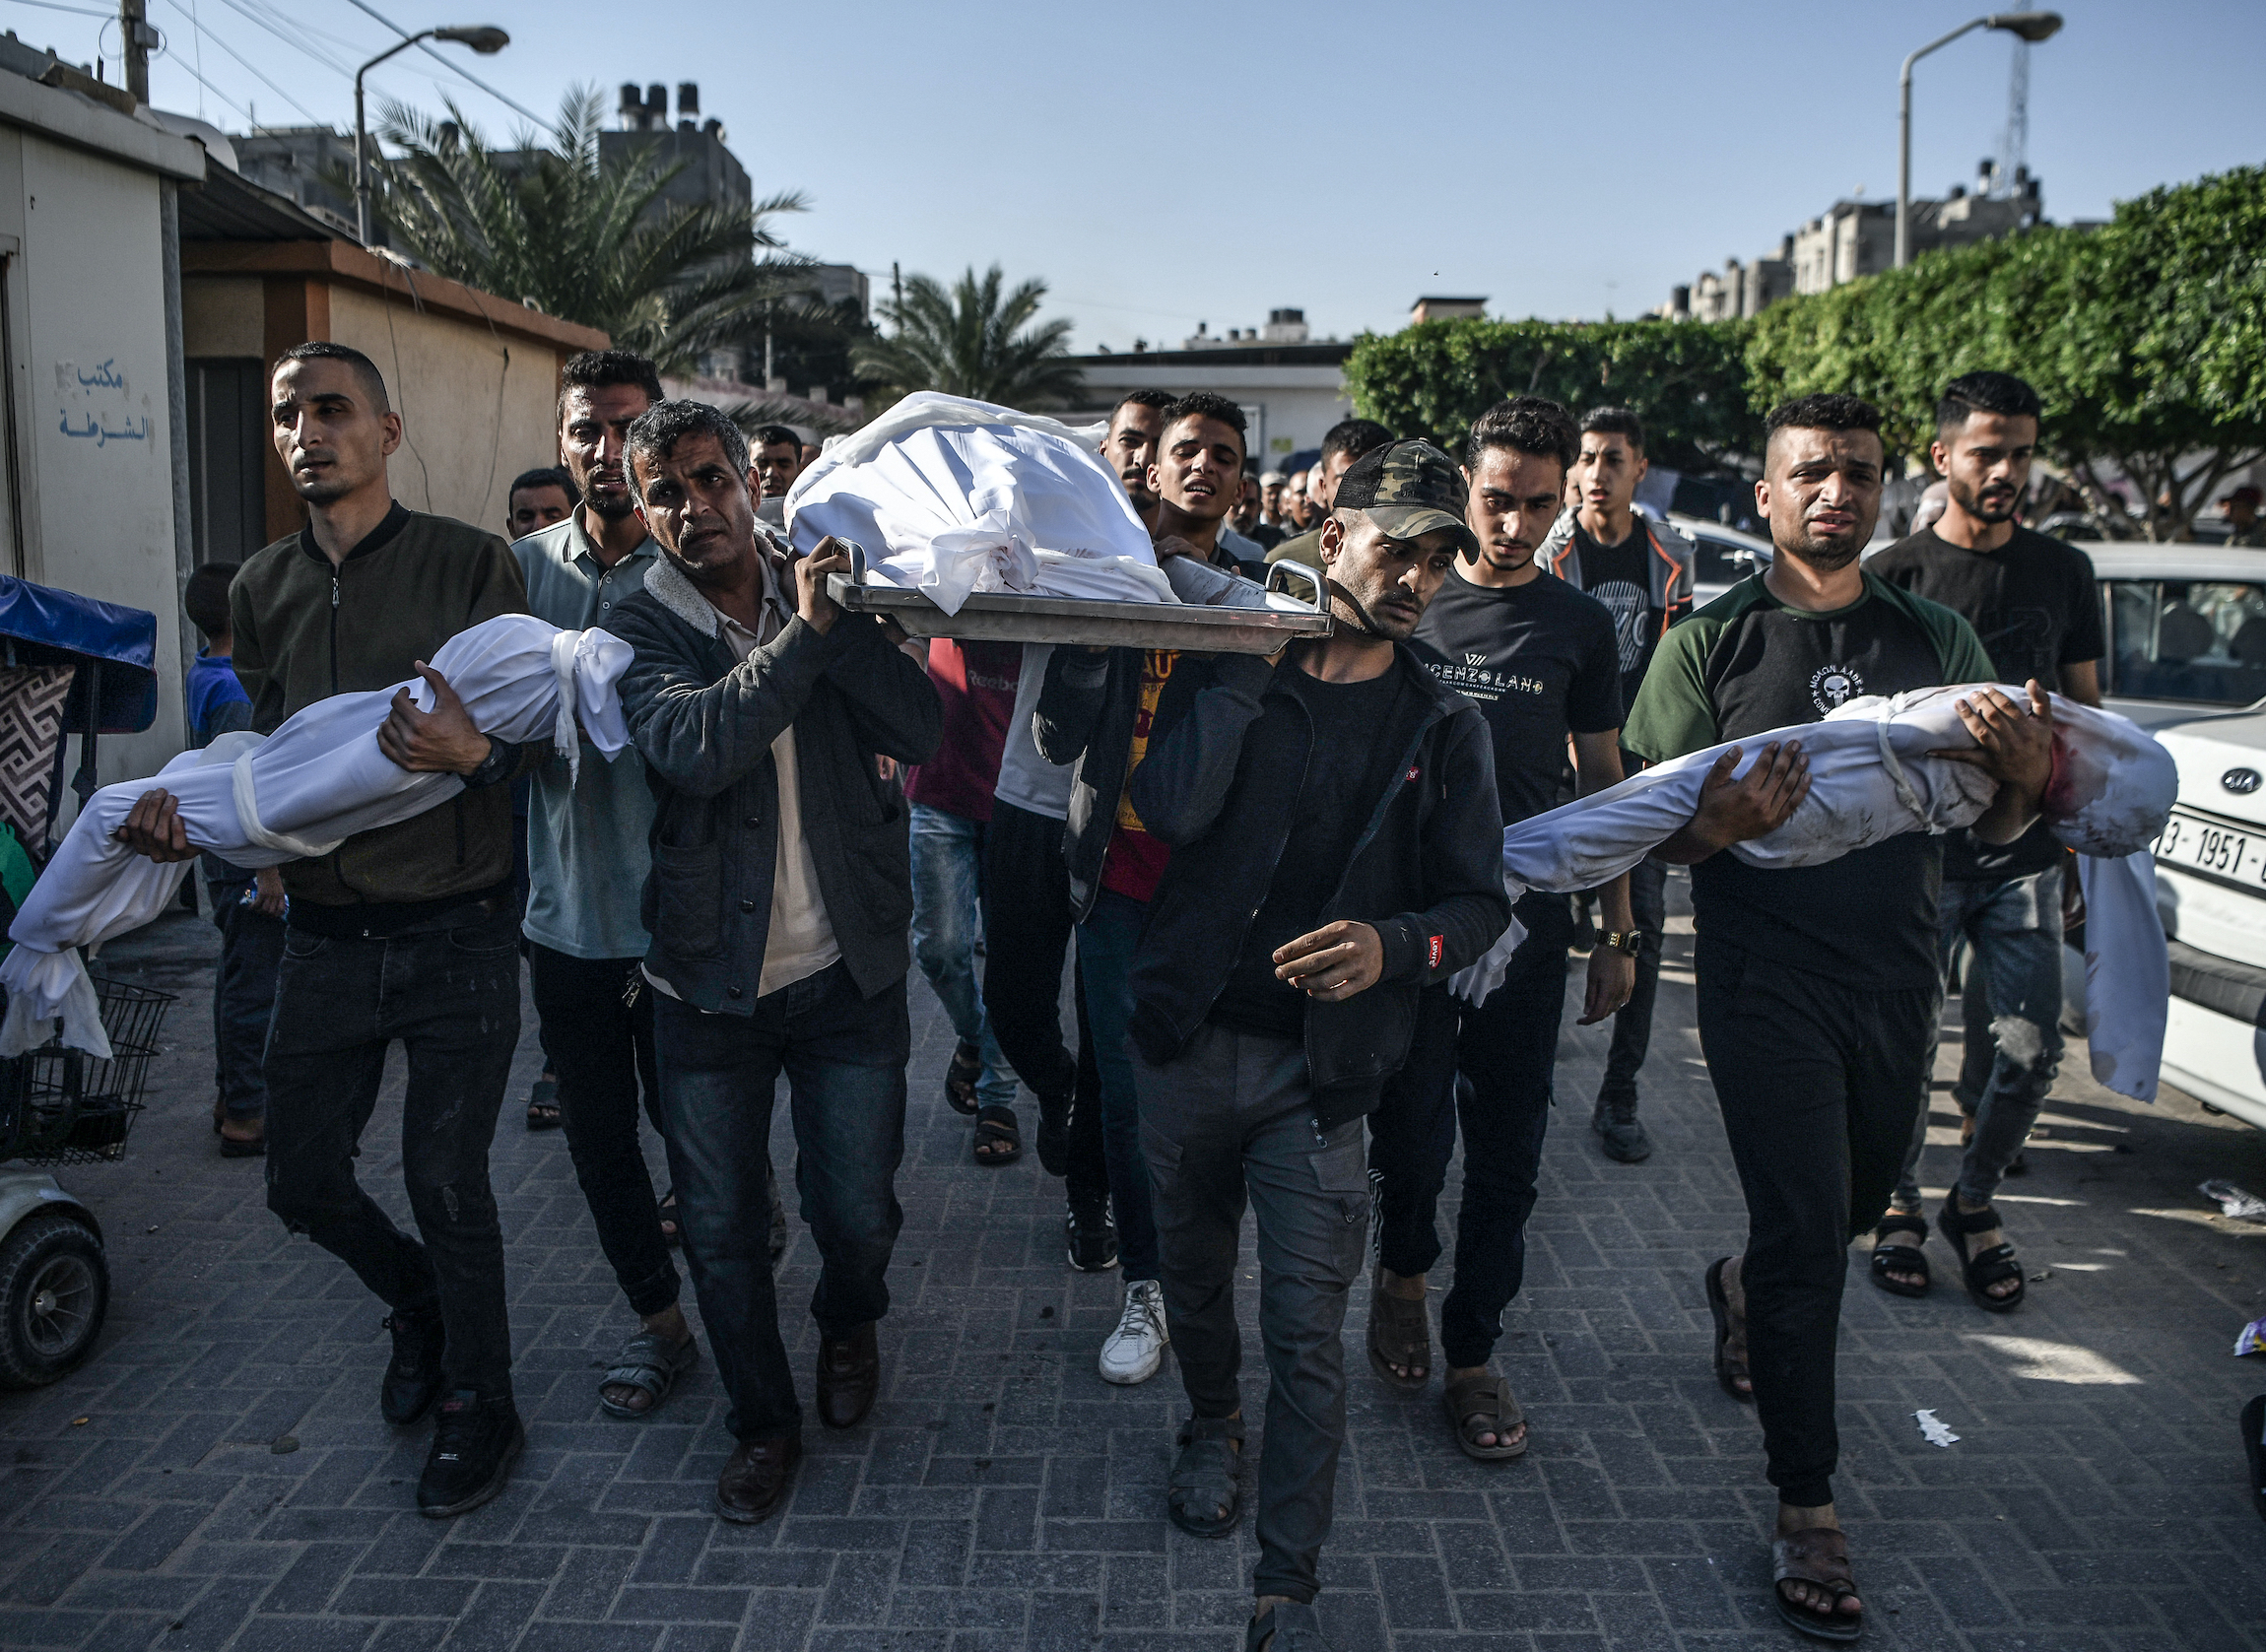 Palestinians in Gaza carry bodies through the street